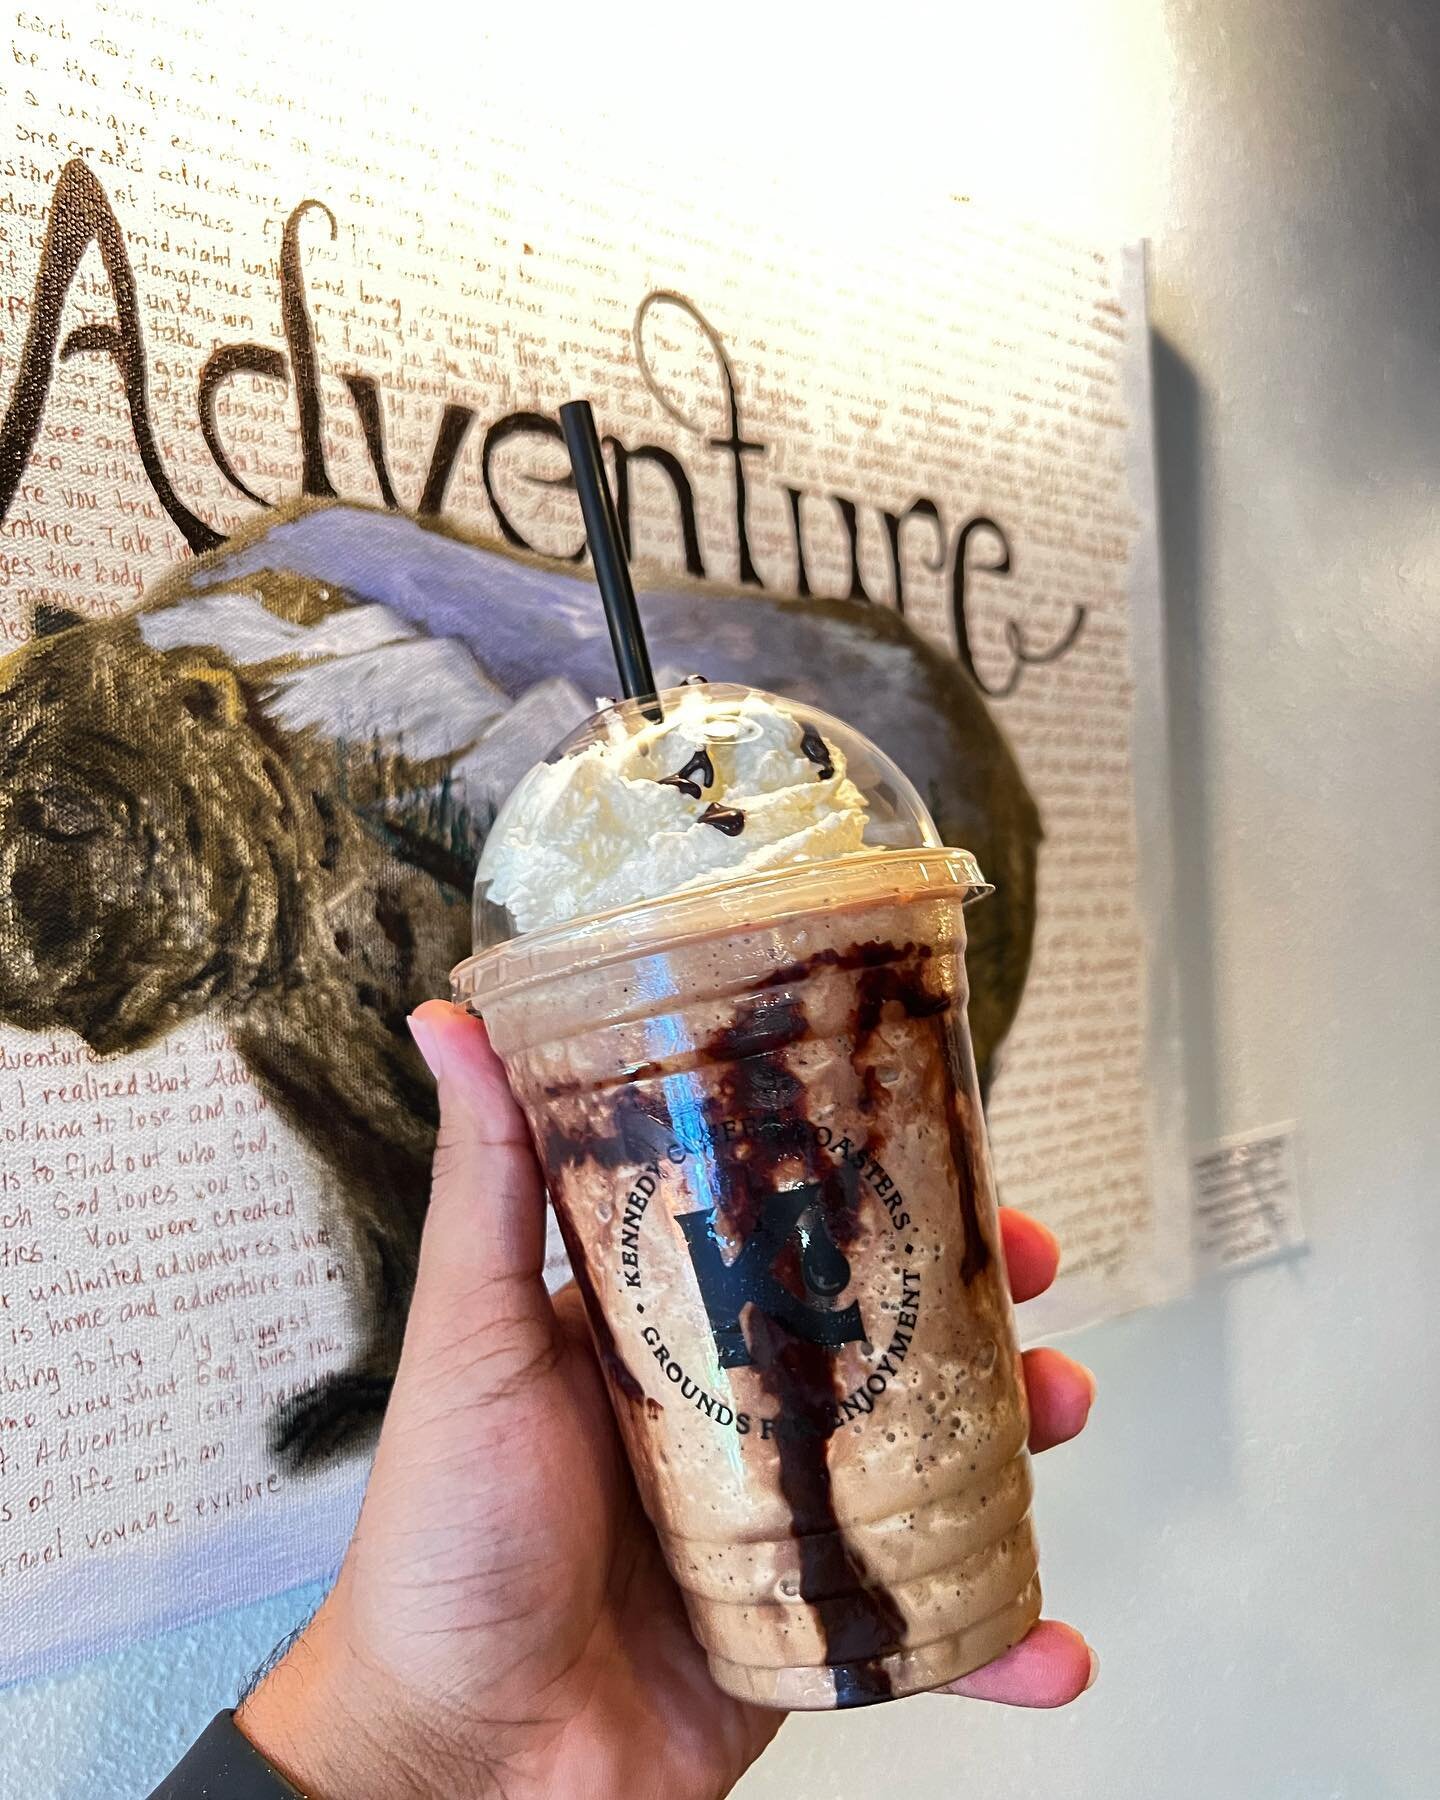 🐻Have you tried our Frozen Blackbear? It&rsquo;s a frozen blackberry mocha with a shot of espresso and espresso beans blended into it! It makes for the perfect caffeinated treat. 
.
Don&rsquo;t like blackberry? Try the Frozen Grinder instead!
.
#ken